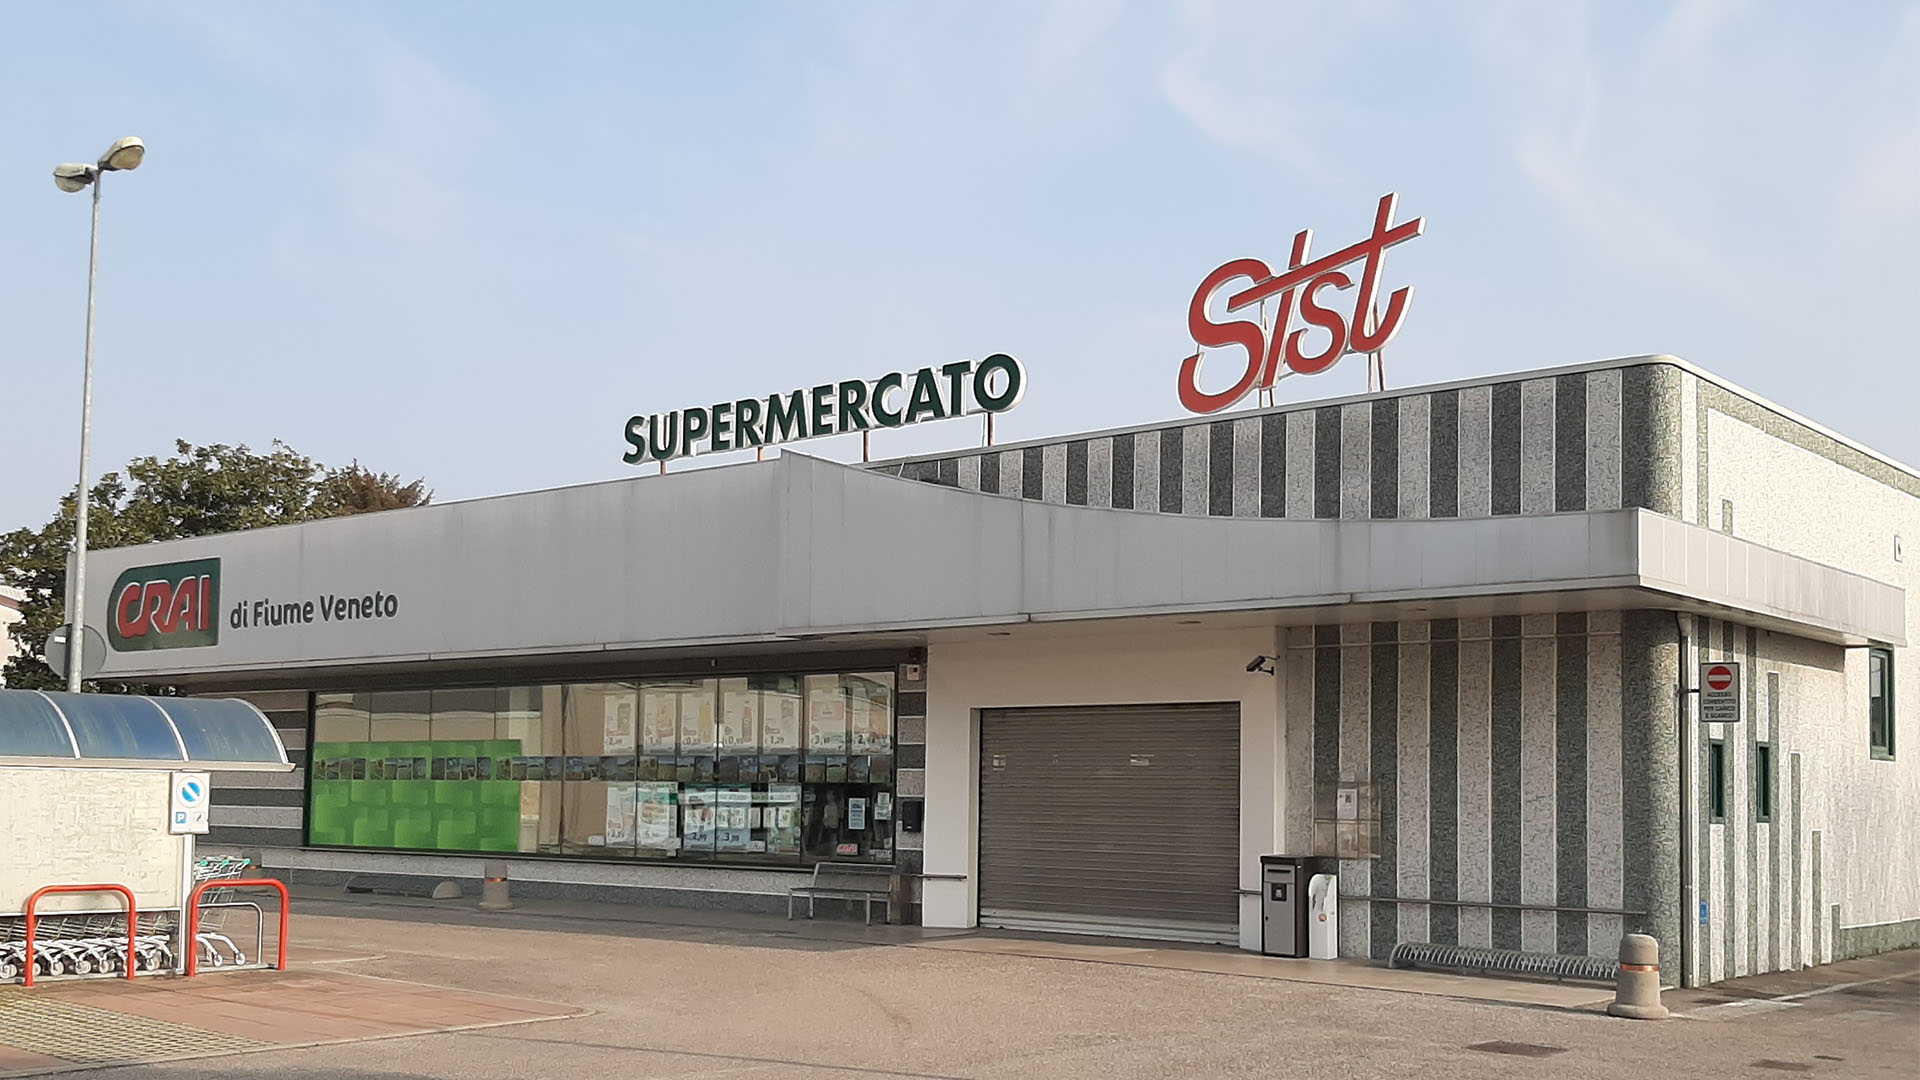 Stabilimento commerciale Sist